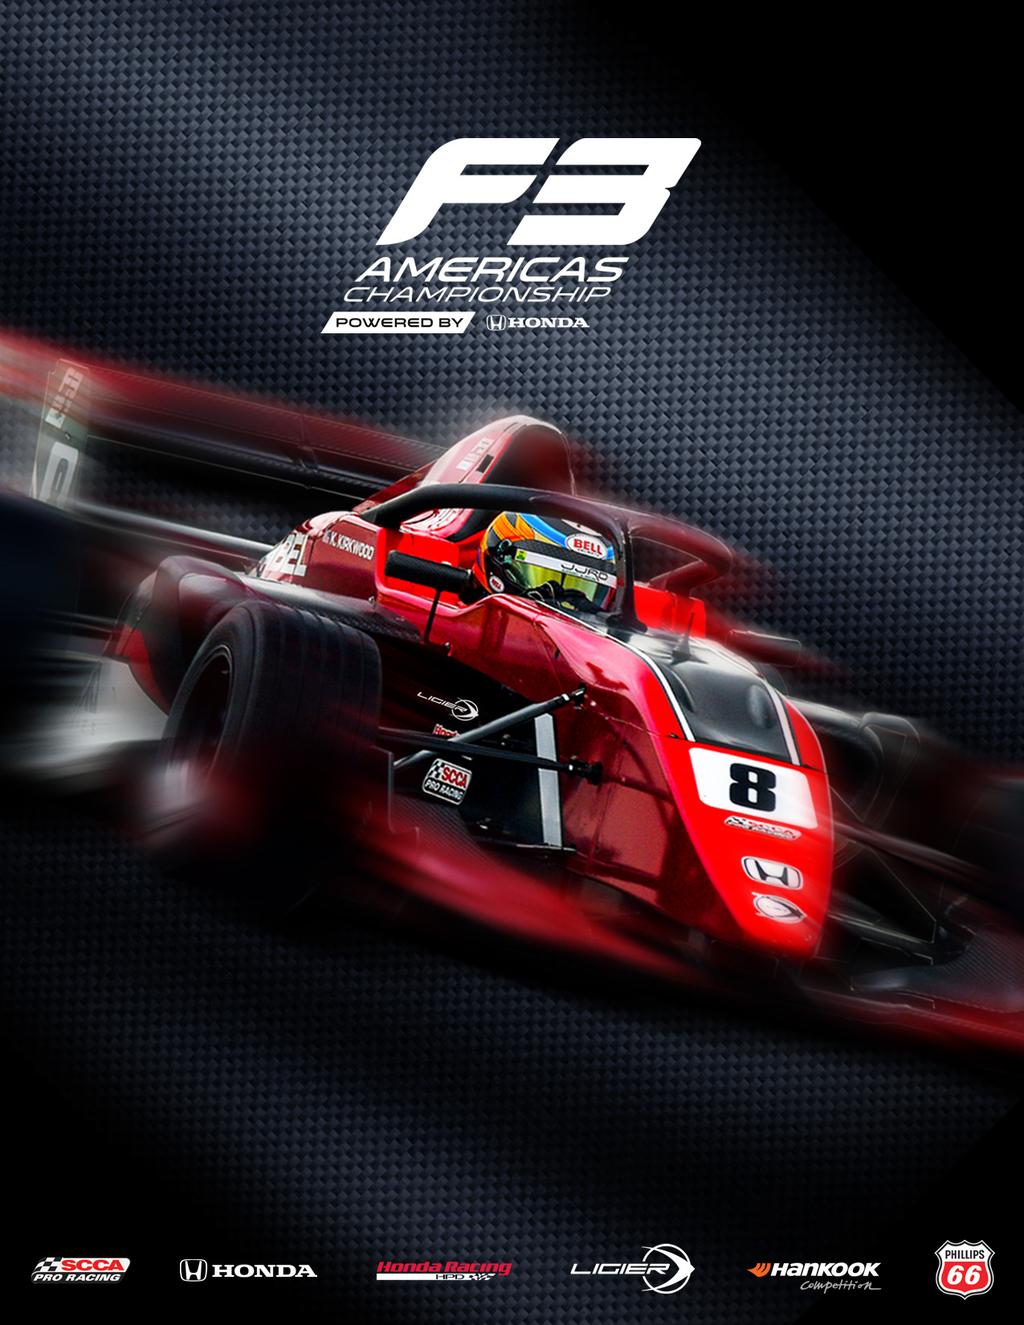 2019 Driver & Buyer s Informational Guide REDEFINING GLOBAL RACING With innovations in safety and affordability, the F3 Americas Championship is designed to attract